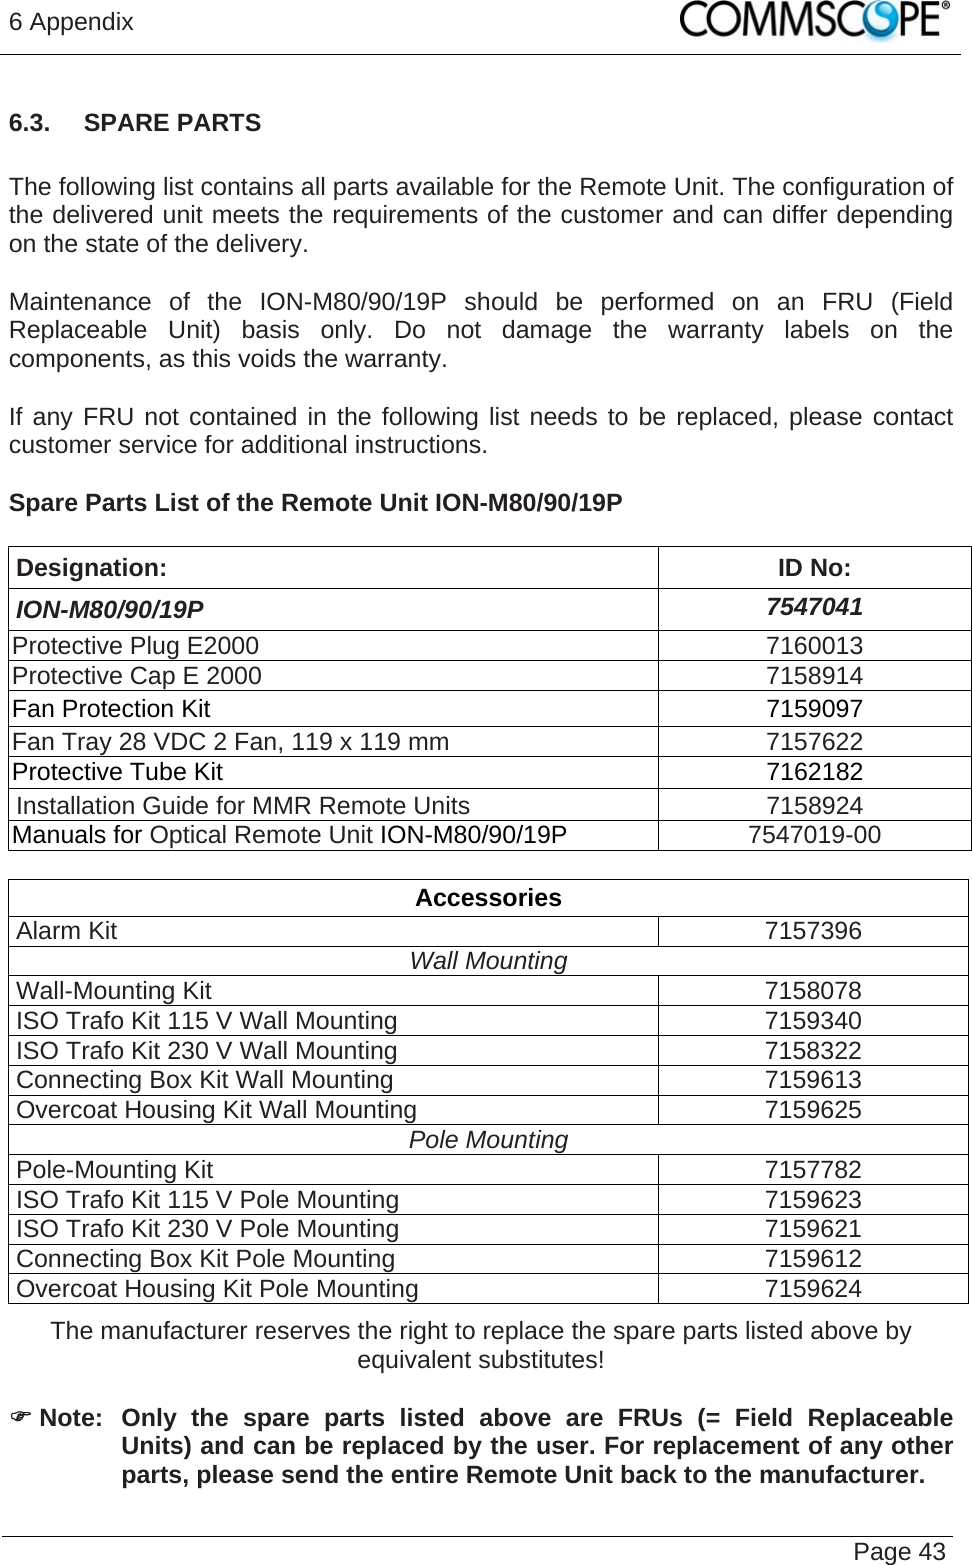 6 Appendix   Page 43 6.3.  SPARE PARTS  The following list contains all parts available for the Remote Unit. The configuration of the delivered unit meets the requirements of the customer and can differ depending on the state of the delivery.  Maintenance of the ION-M80/90/19P should be performed on an FRU (Field Replaceable Unit) basis only. Do not damage the warranty labels on the components, as this voids the warranty.   If any FRU not contained in the following list needs to be replaced, please contact customer service for additional instructions.  Spare Parts List of the Remote Unit ION-M80/90/19P  Designation: ID No: ION-M80/90/19P  7547041 Protective Plug E2000  7160013 Protective Cap E 2000  7158914 Fan Protection Kit  7159097 Fan Tray 28 VDC 2 Fan, 119 x 119 mm  7157622 Protective Tube Kit  7162182 Installation Guide for MMR Remote Units  7158924 Manuals for Optical Remote Unit ION-M80/90/19P  7547019-00  Accessories Alarm Kit  7157396 Wall Mounting Wall-Mounting Kit  7158078 ISO Trafo Kit 115 V Wall Mounting  7159340 ISO Trafo Kit 230 V Wall Mounting  7158322 Connecting Box Kit Wall Mounting  7159613 Overcoat Housing Kit Wall Mounting  7159625 Pole Mounting  Pole-Mounting Kit  7157782 ISO Trafo Kit 115 V Pole Mounting  7159623 ISO Trafo Kit 230 V Pole Mounting  7159621 Connecting Box Kit Pole Mounting  7159612 Overcoat Housing Kit Pole Mounting  7159624 The manufacturer reserves the right to replace the spare parts listed above by equivalent substitutes!  ) Note:  Only the spare parts listed above are FRUs (= Field Replaceable Units) and can be replaced by the user. For replacement of any other parts, please send the entire Remote Unit back to the manufacturer.  